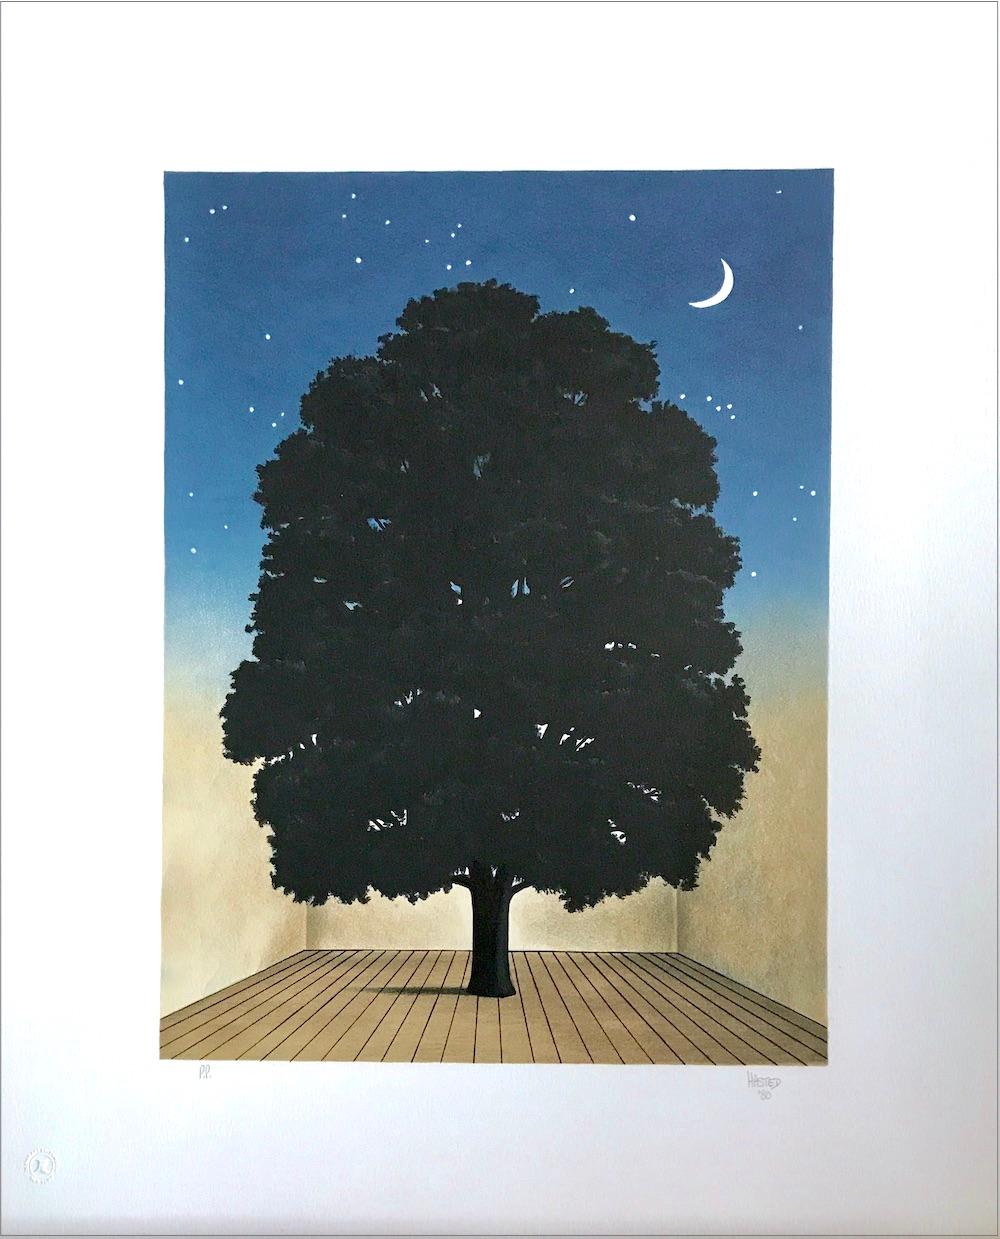 SONG OF PRAISE Hand Drawn Lithograph, Tree Portrait, Night Sky, Crescent Moon - Print by Michael Hasted